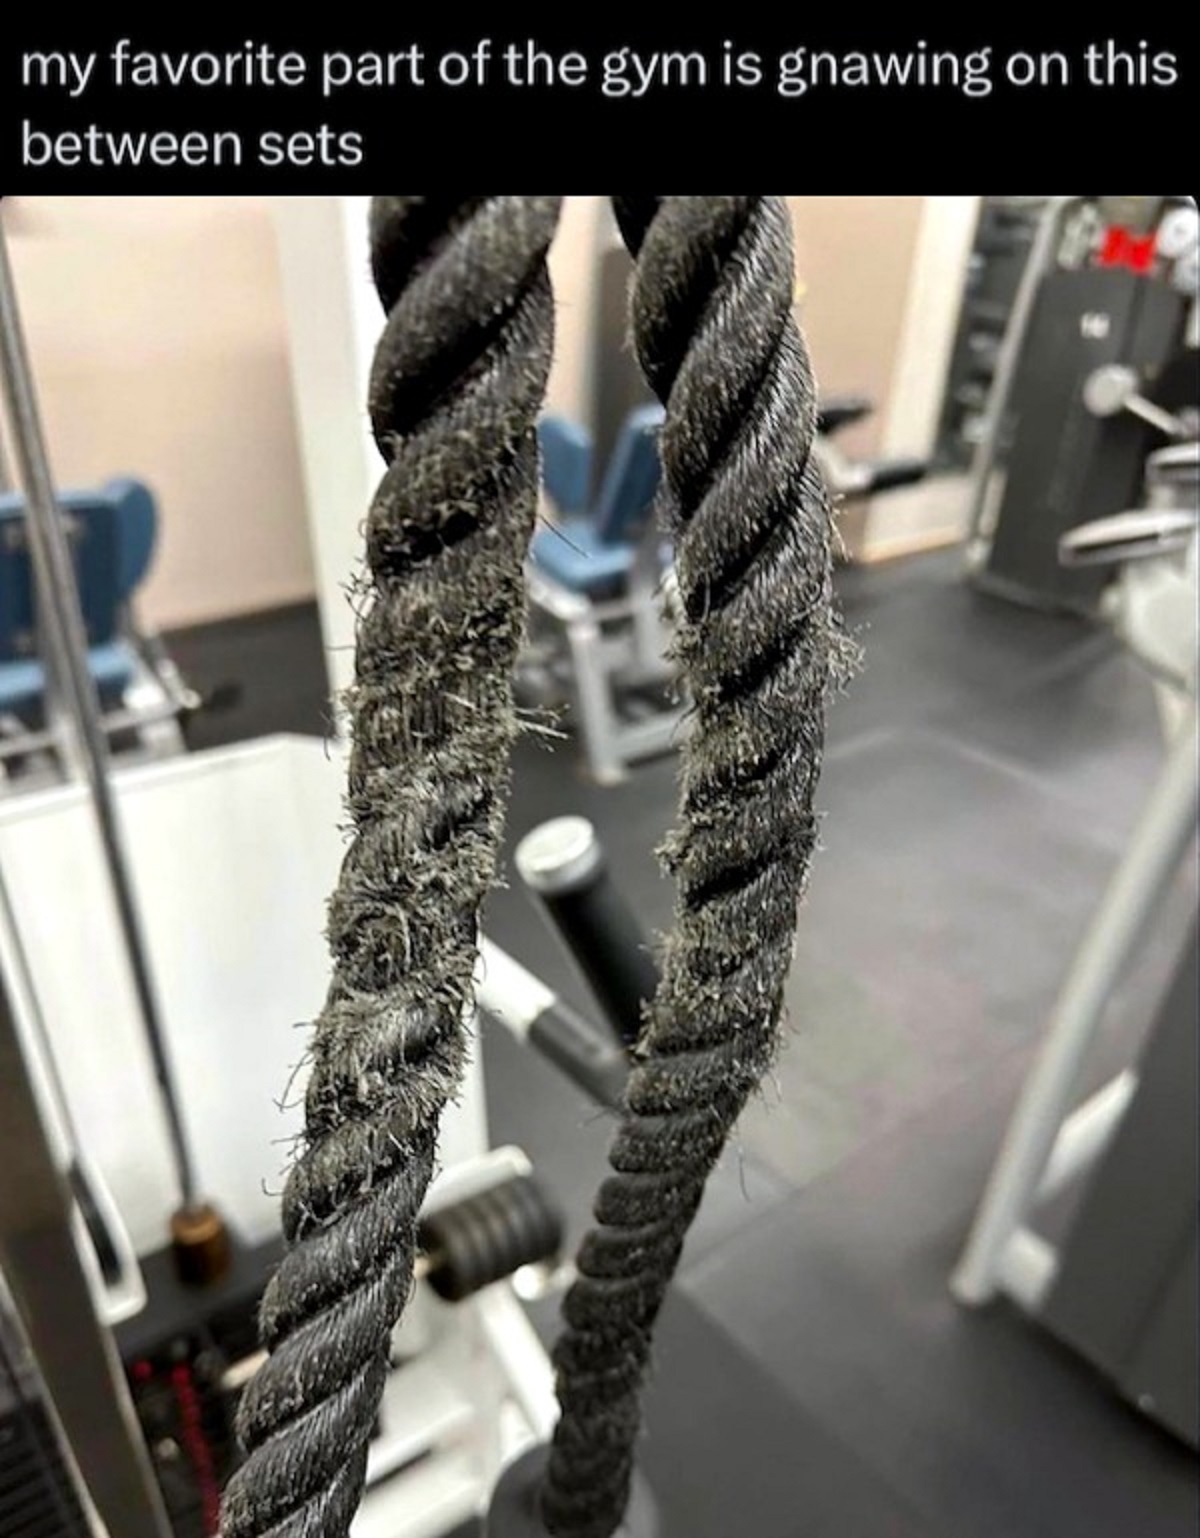 crochet - my favorite part of the gym is gnawing on this between sets